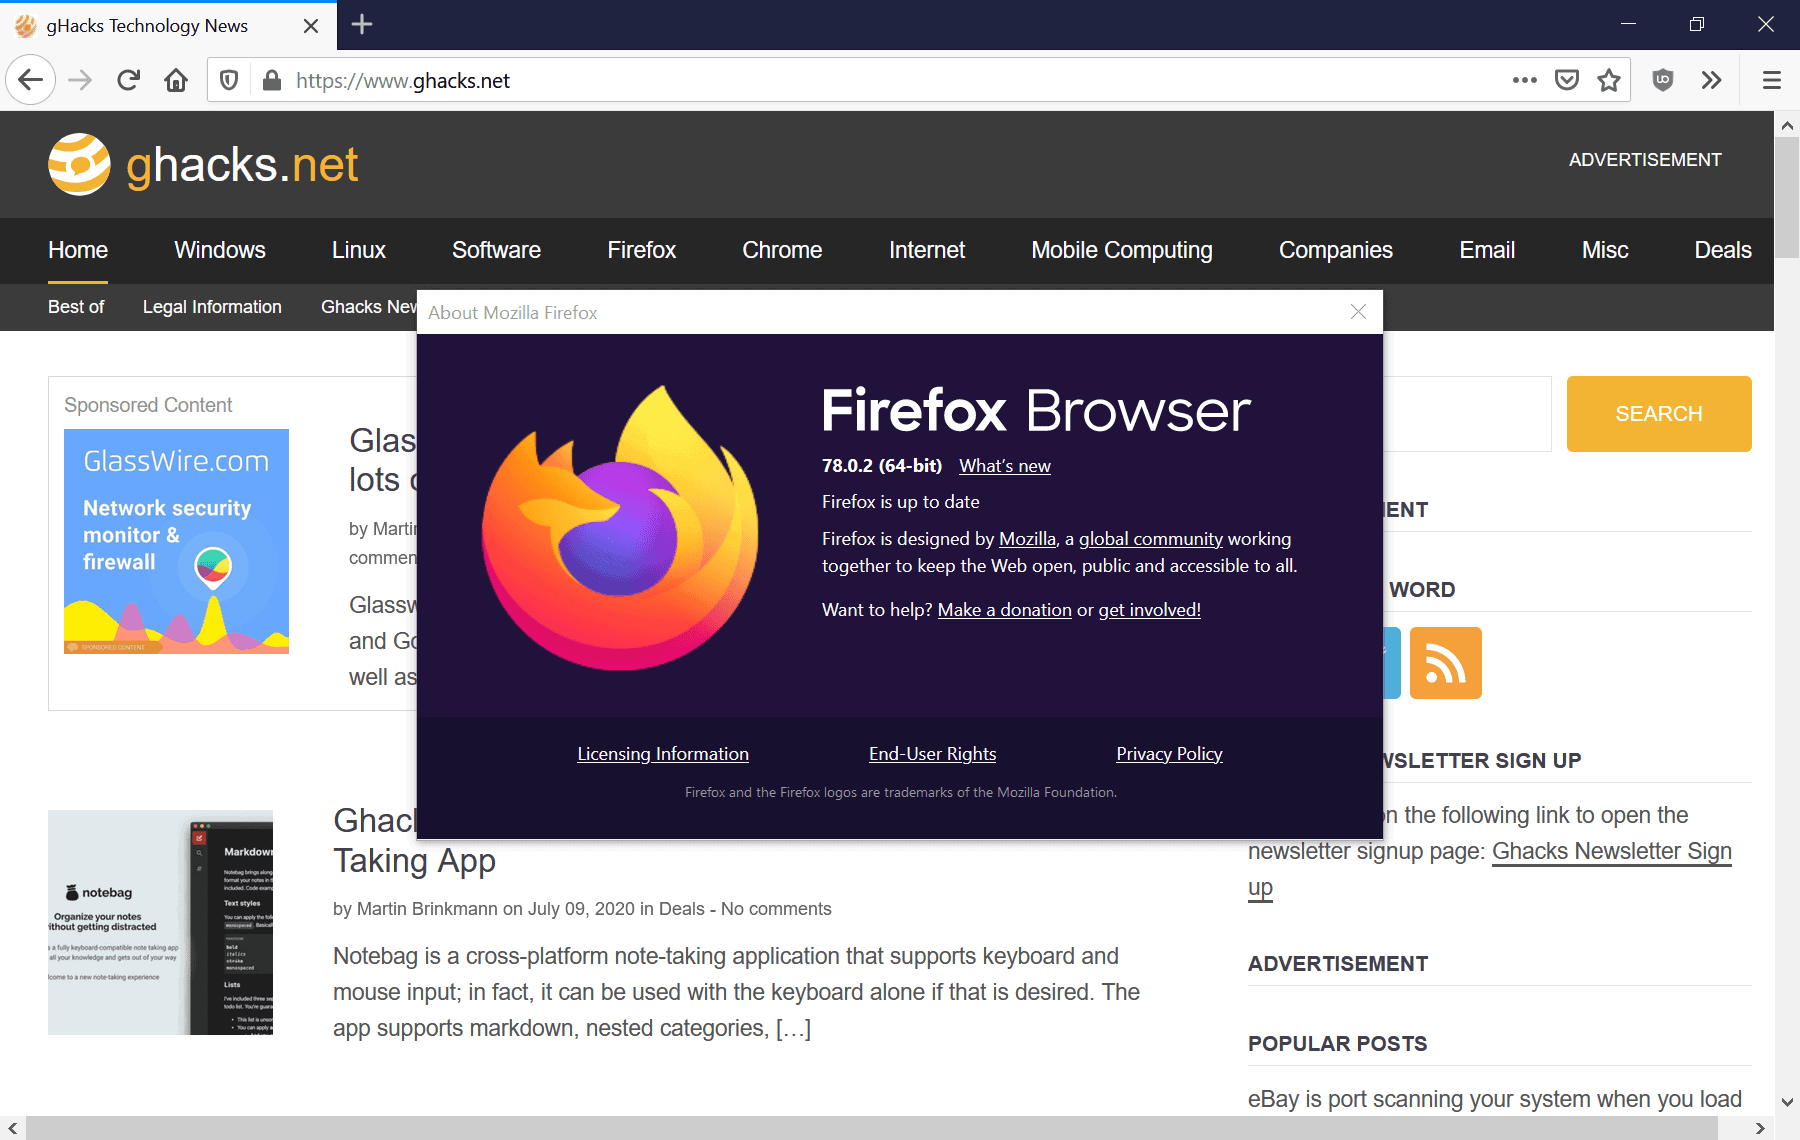 Mozilla releases Firefox 78.0.2 security update